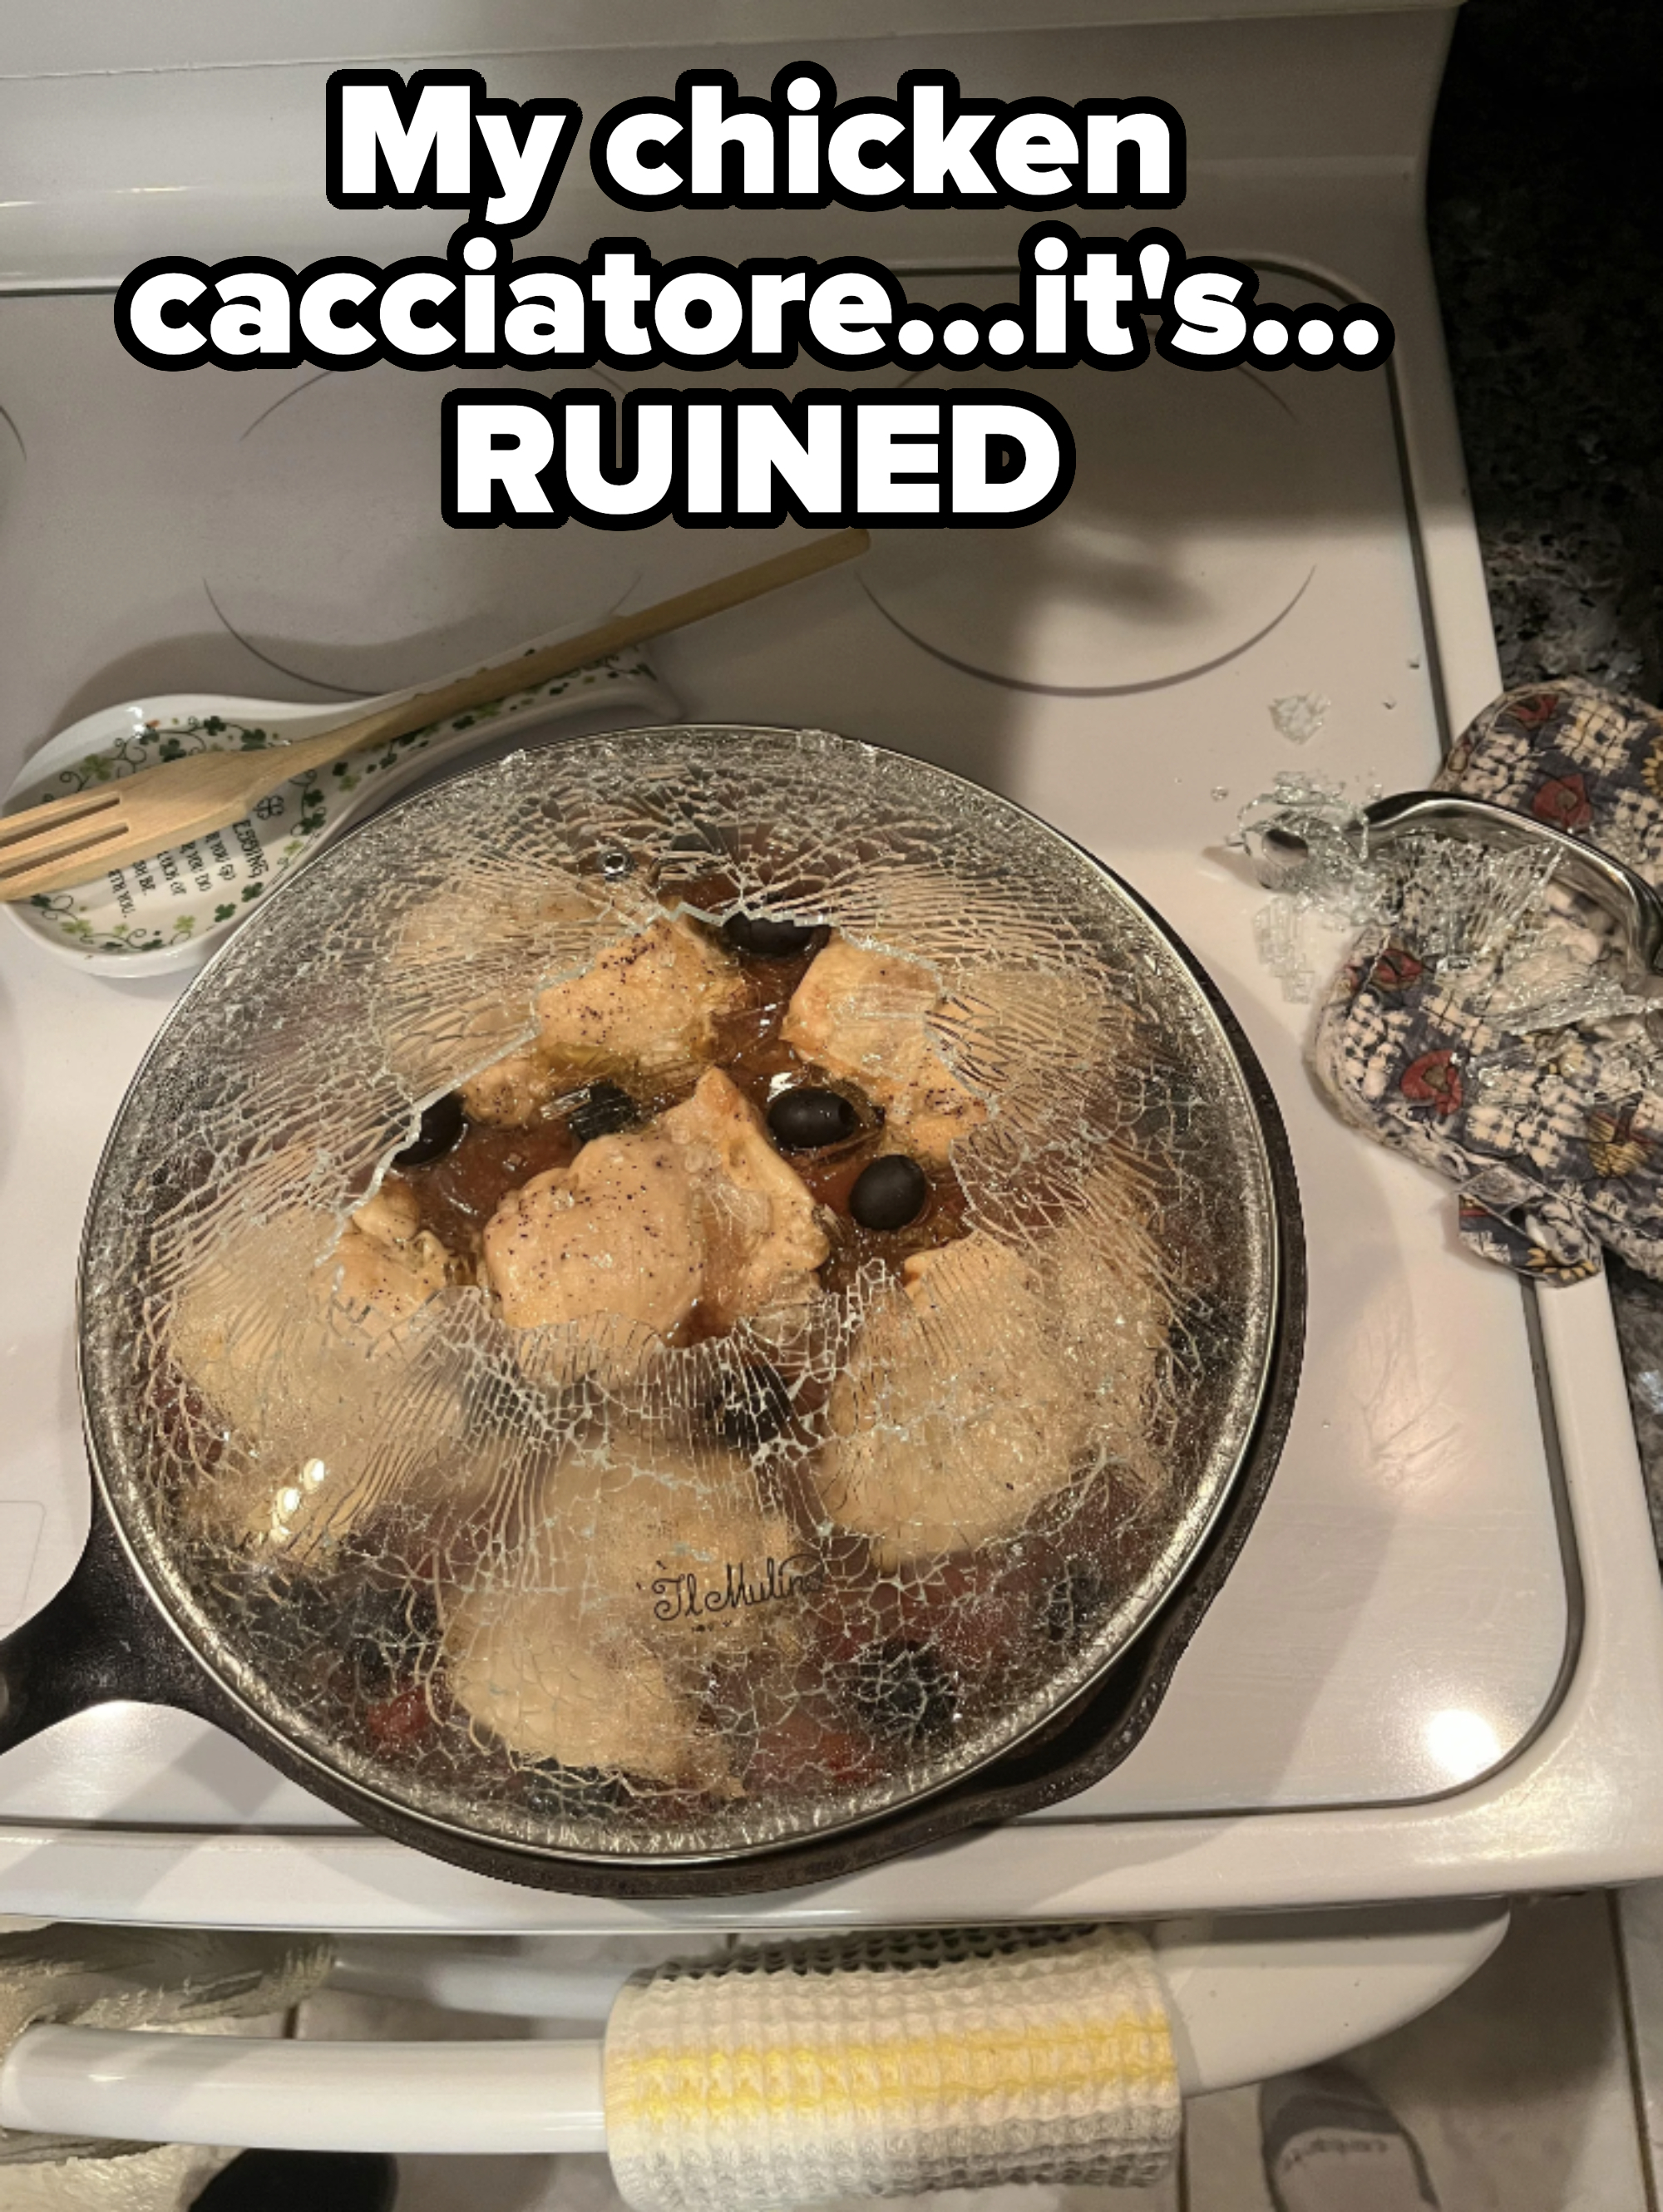 Stovetop with a pan containing chicken cacciatore, covered by a shattered lid